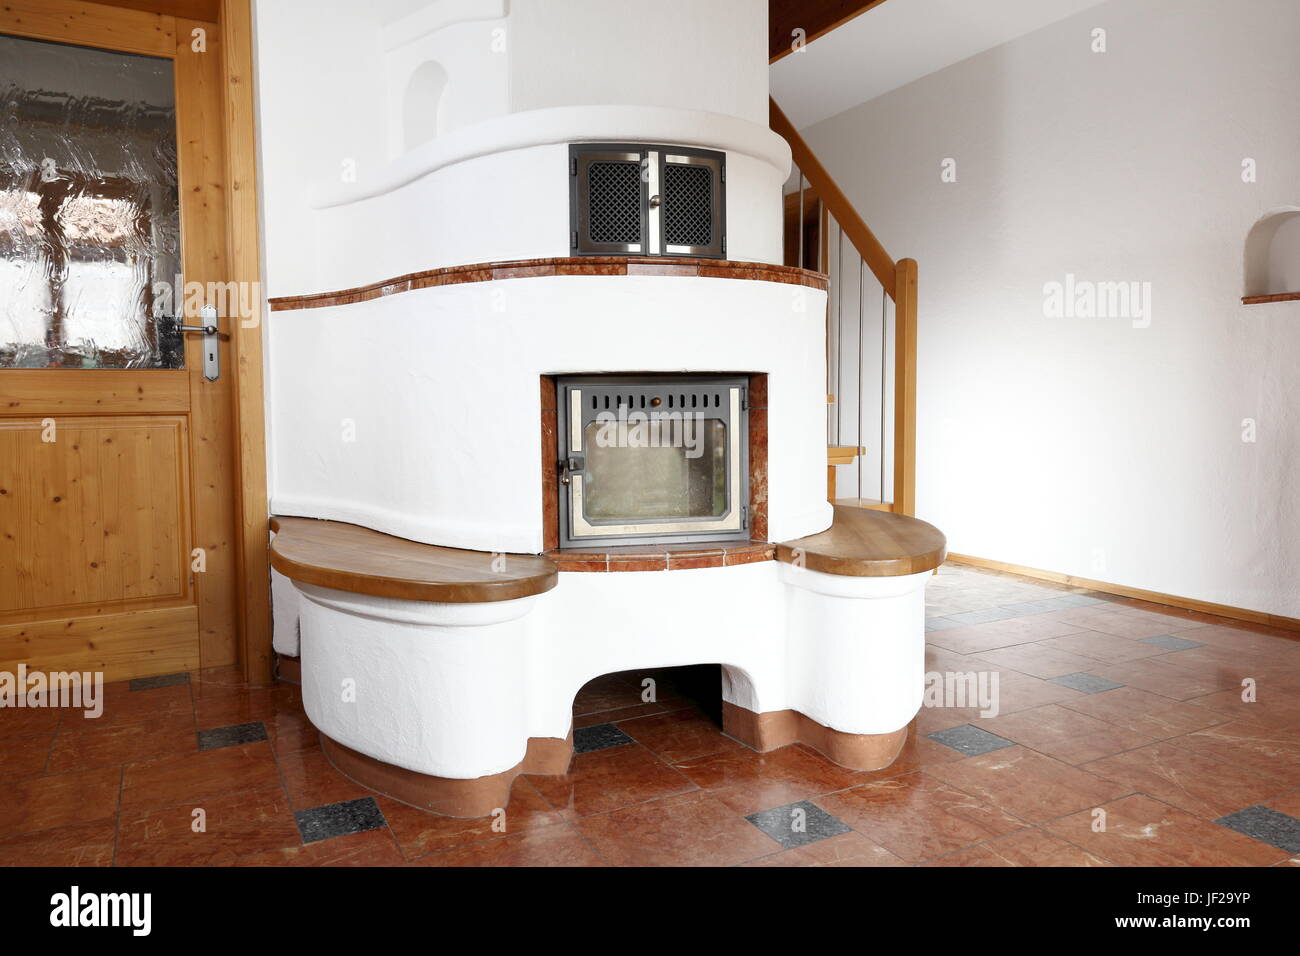 round fire place Stock Photo